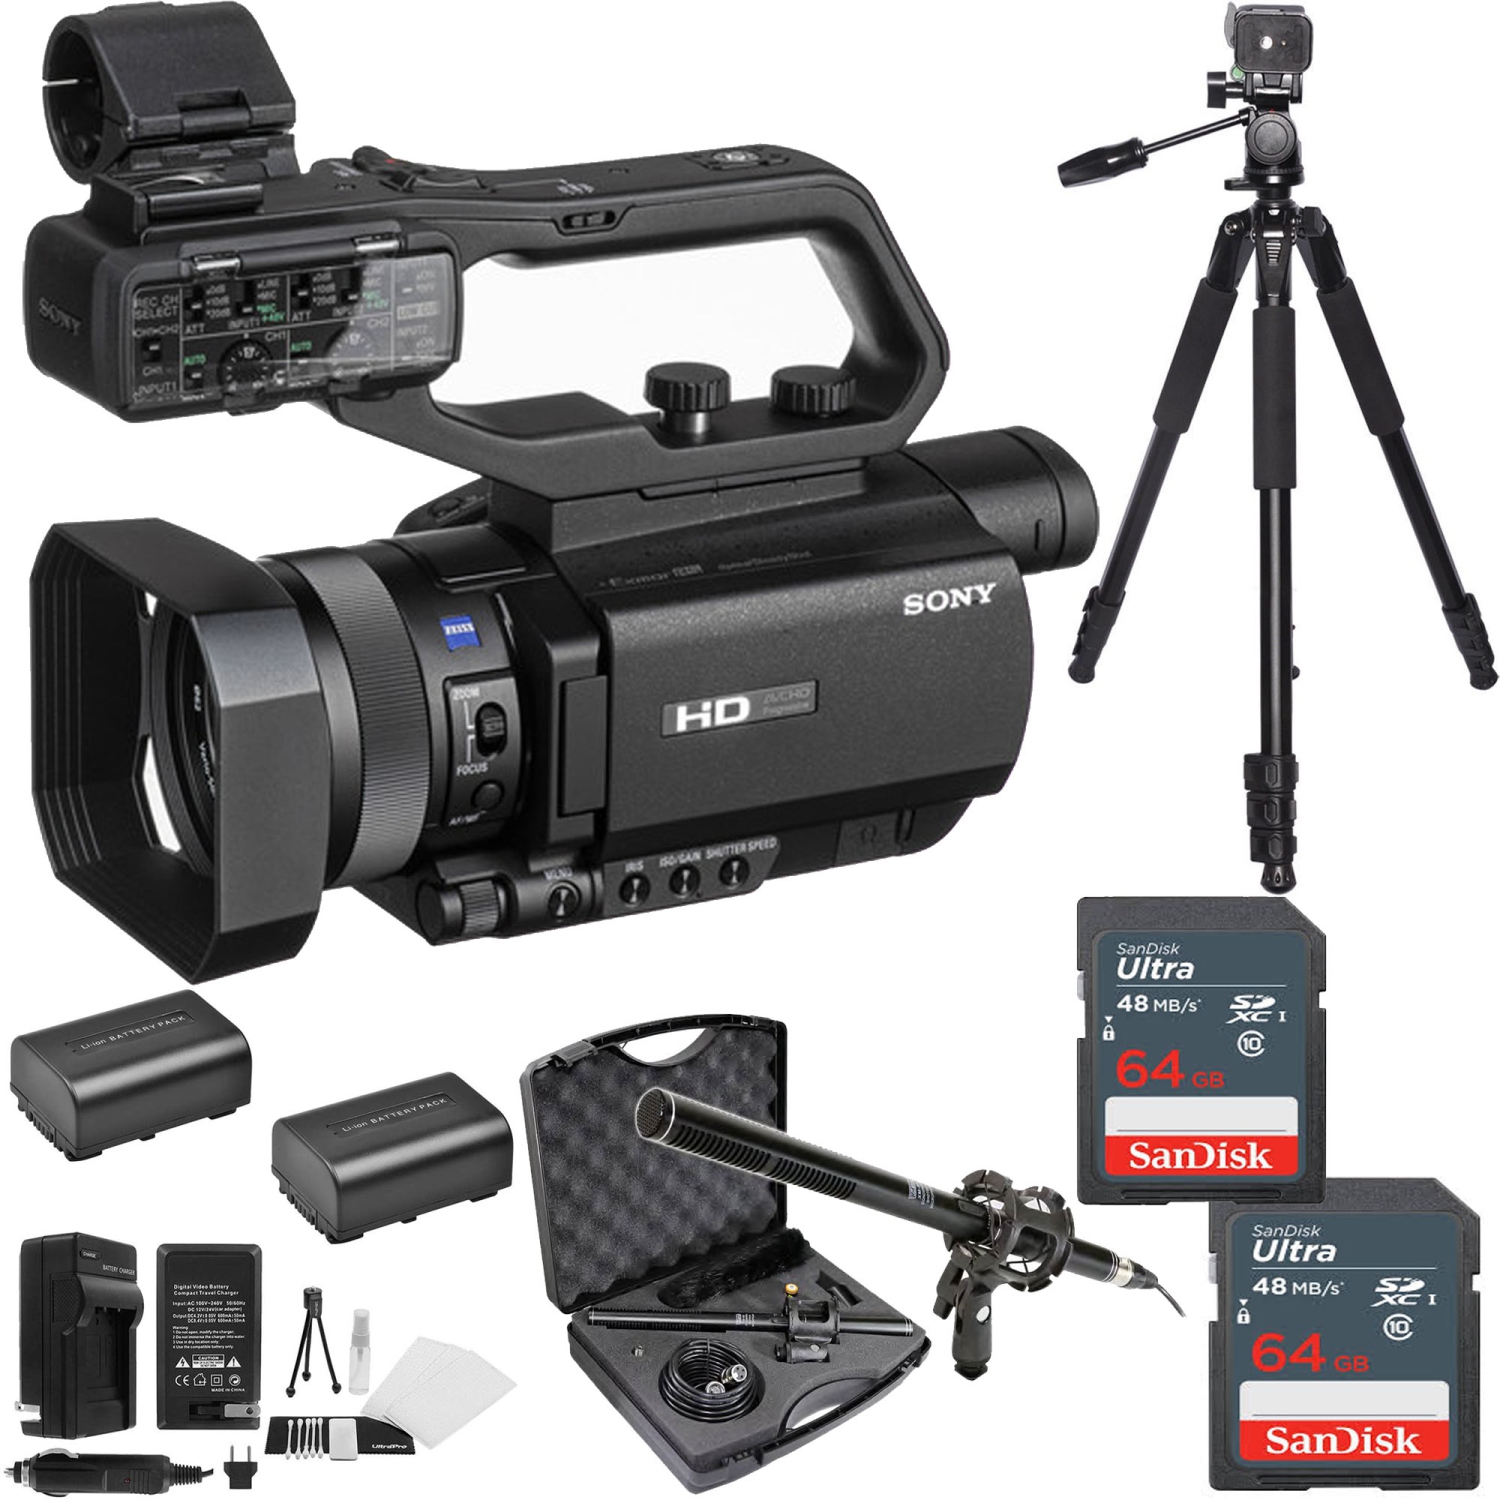 Sony HXR-MC88 Full HD Camcorder with 2x 64GB Sandisk MCs | Microphone Kit | 2x Spare Batteries & AC/DC Charger | Tripod Bundle - US Version w/ Seller Warranty